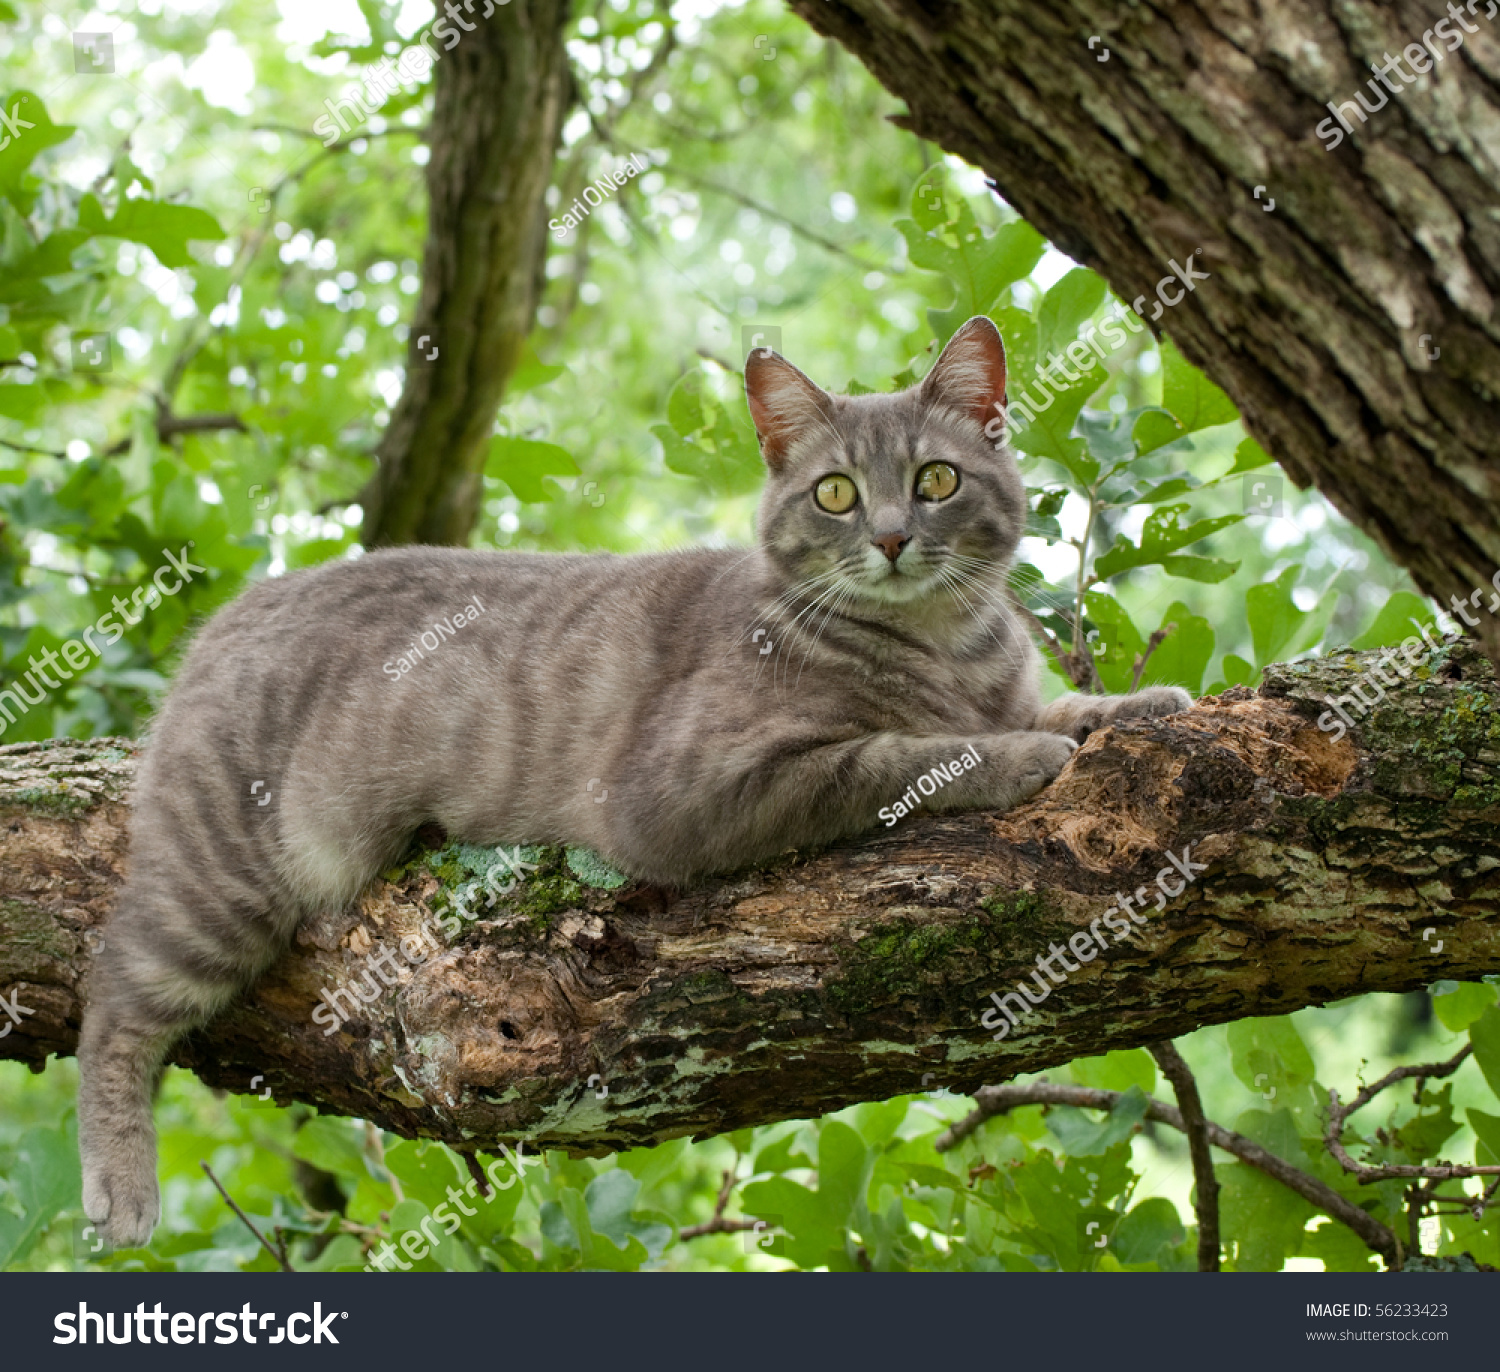 Spotted Blue Tabby Cat On Tree Stock Photo (Royalty Free) 56233423 ...